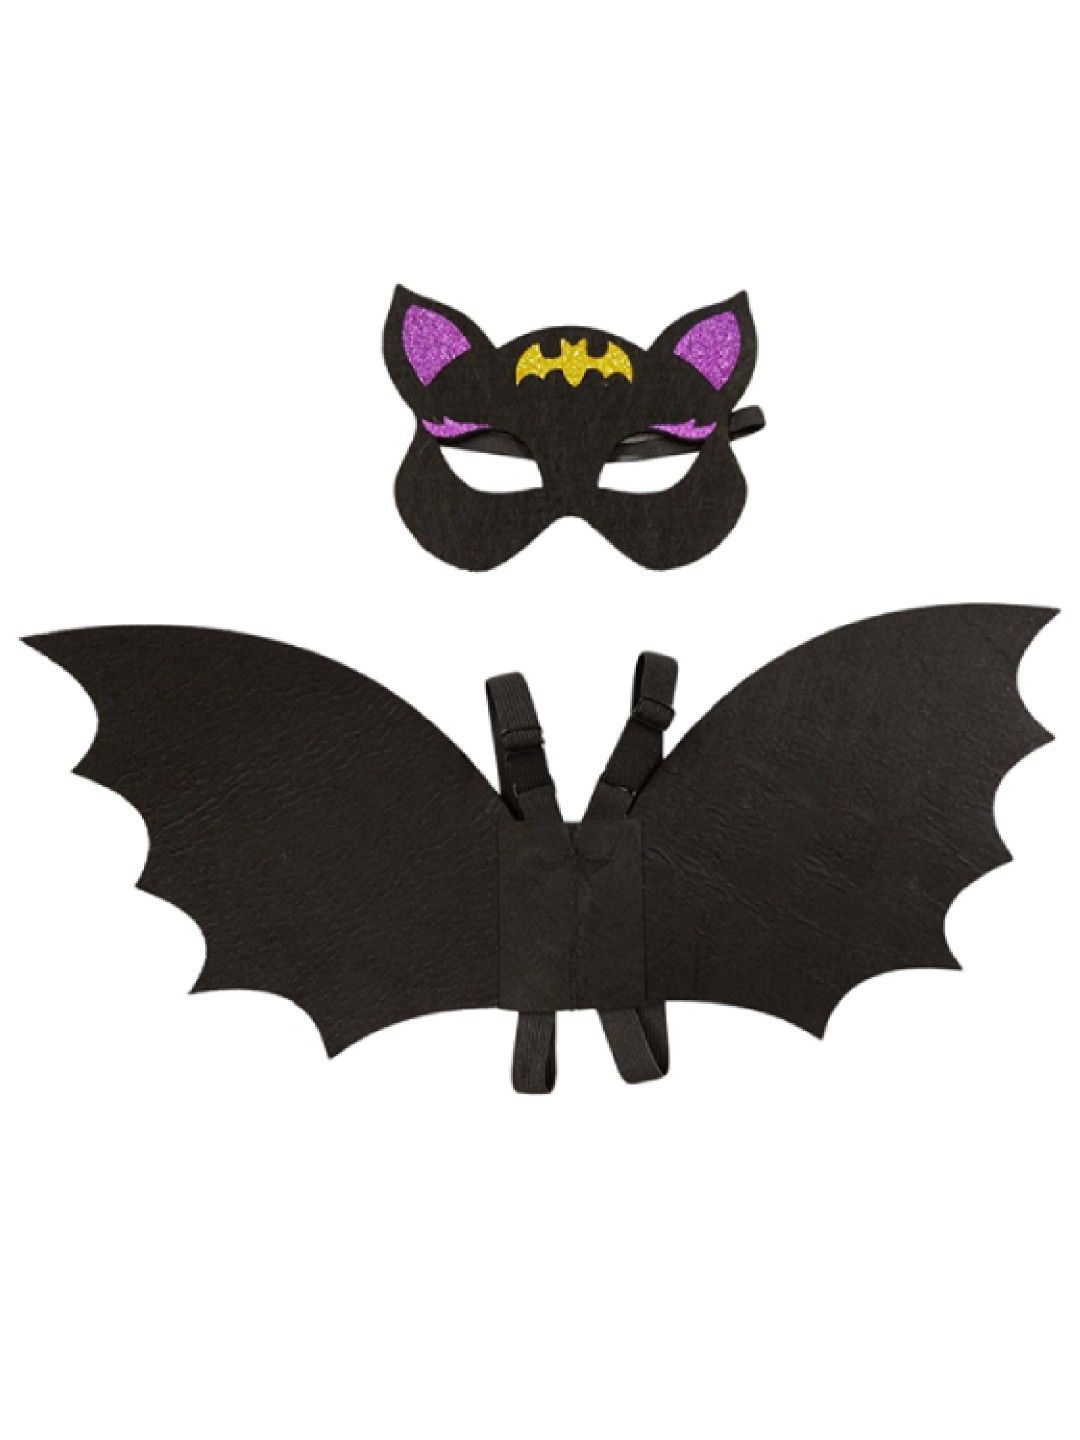 Seams 195 Bat Wing and Mask Halloween Costume